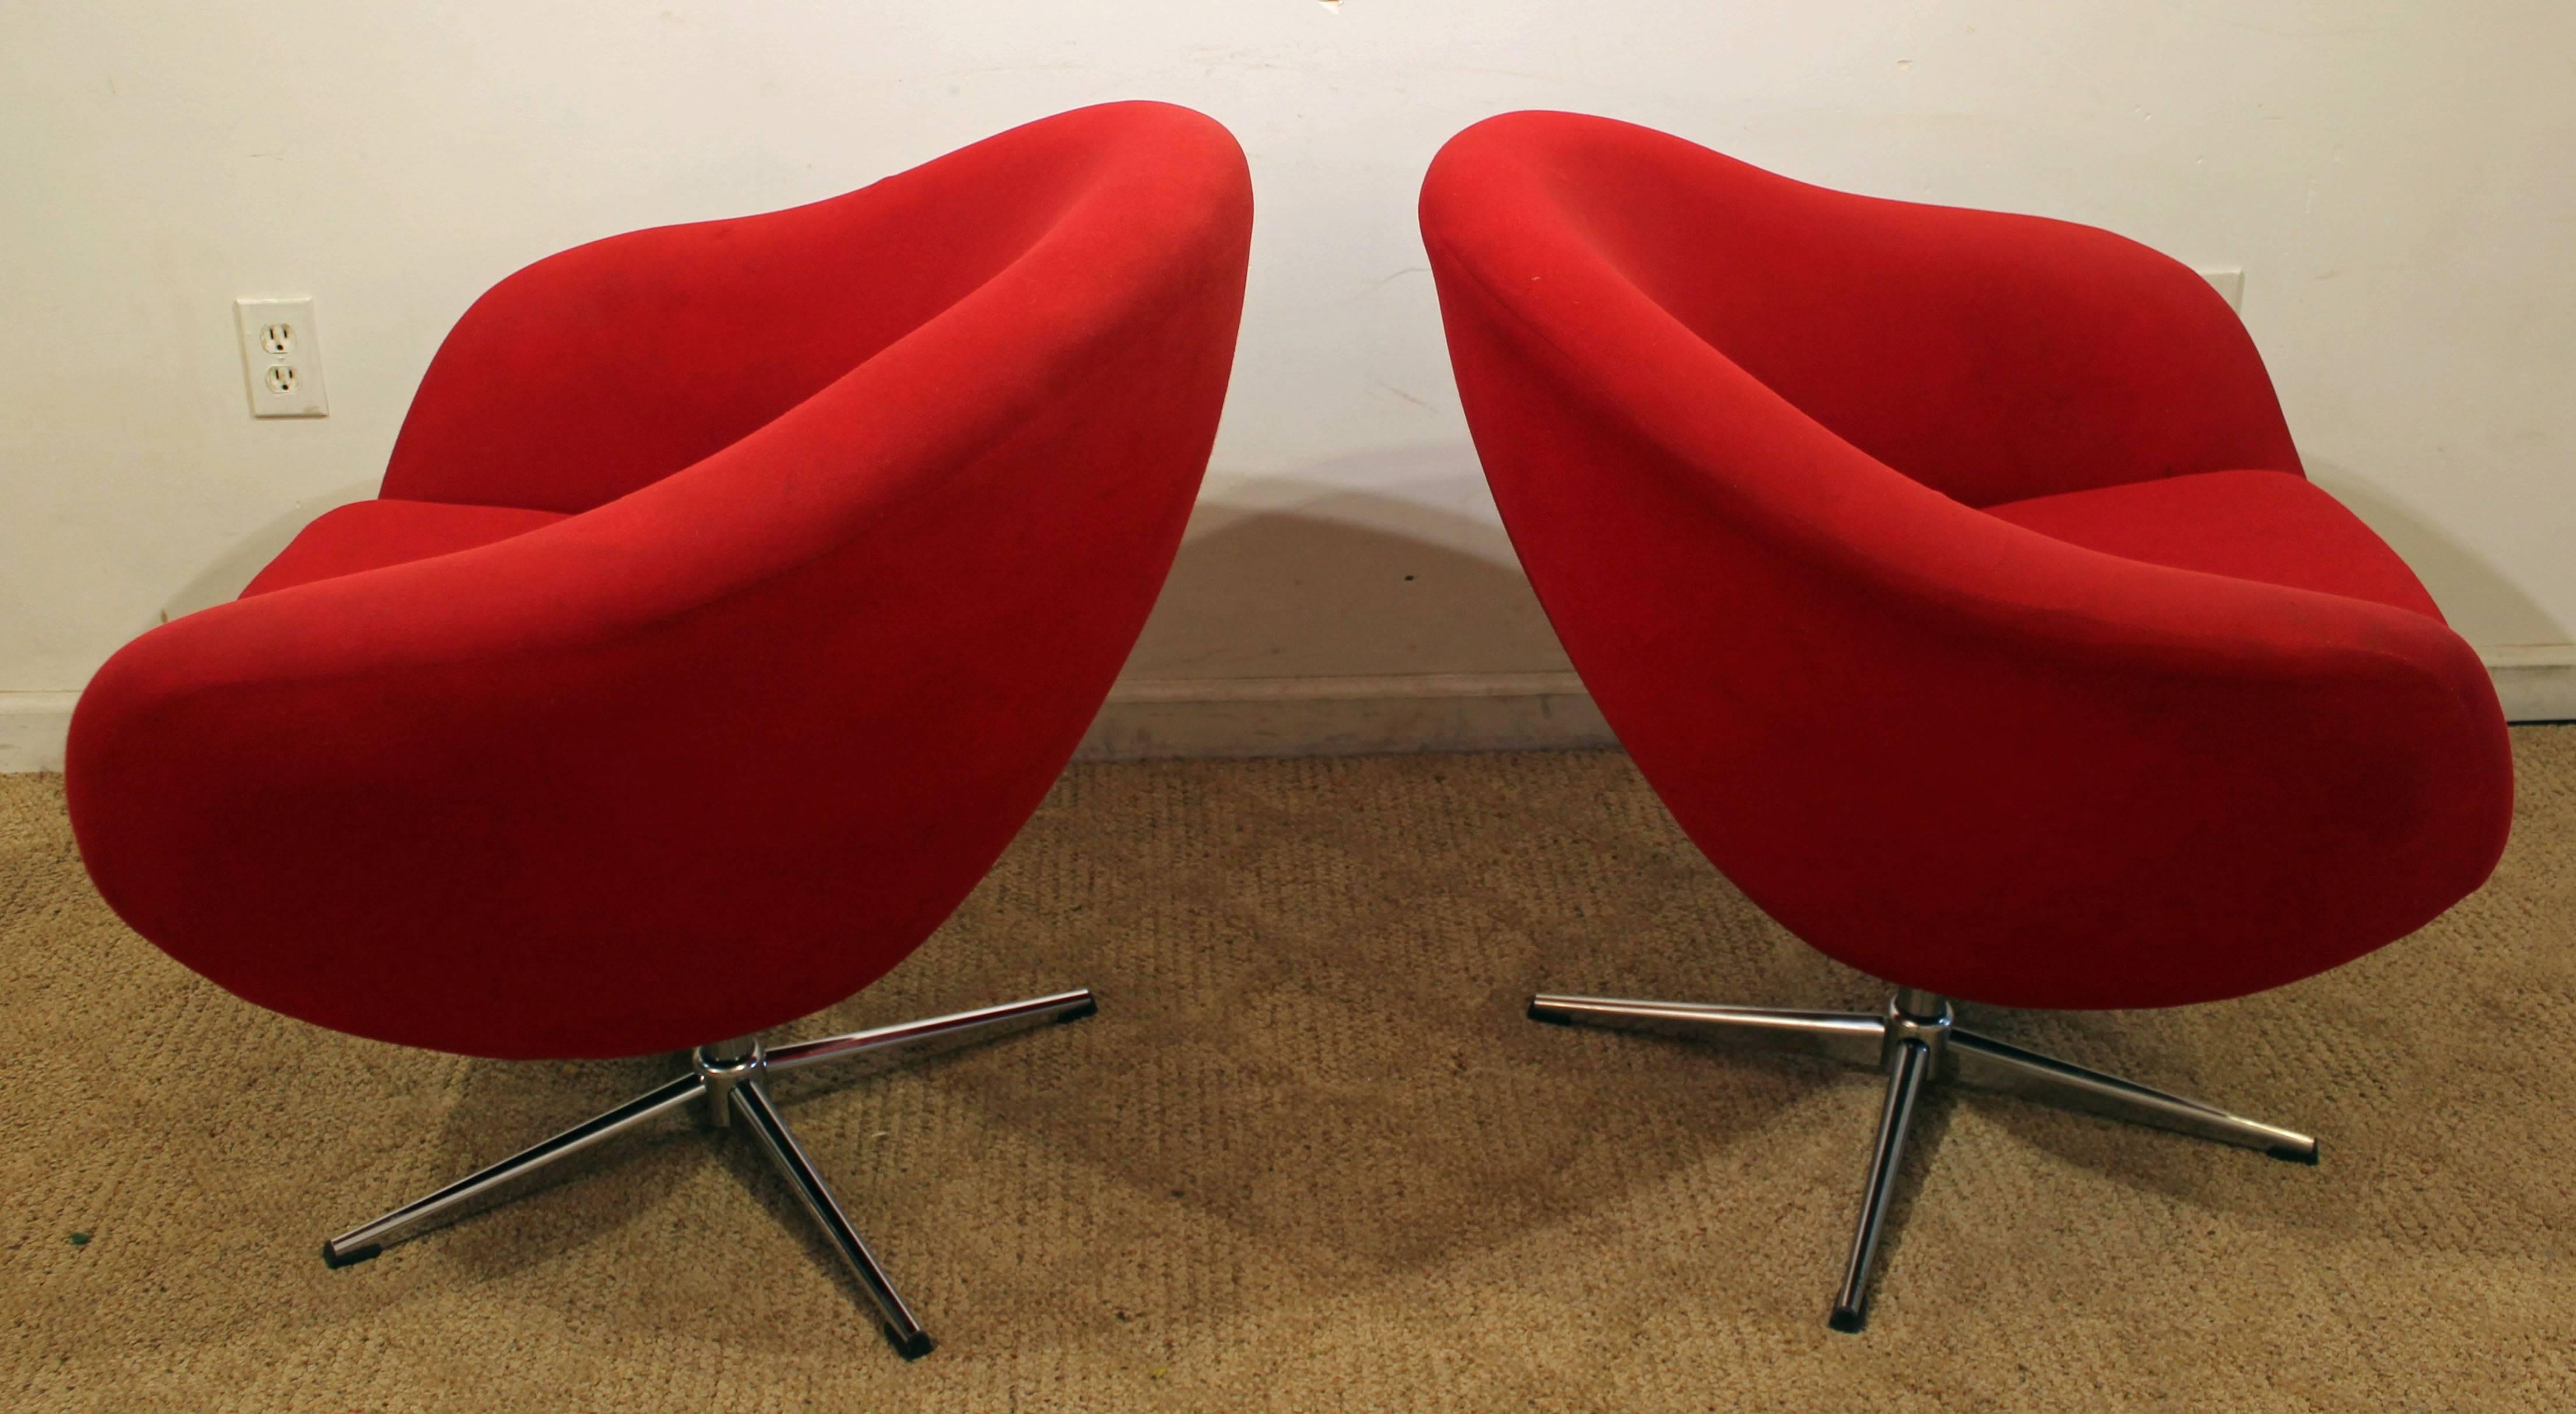 This set includes two chrome swivel pod chairs by Overman, featuring a chrome base and red upholstery. They are in decent condition, but can stand to be redone.